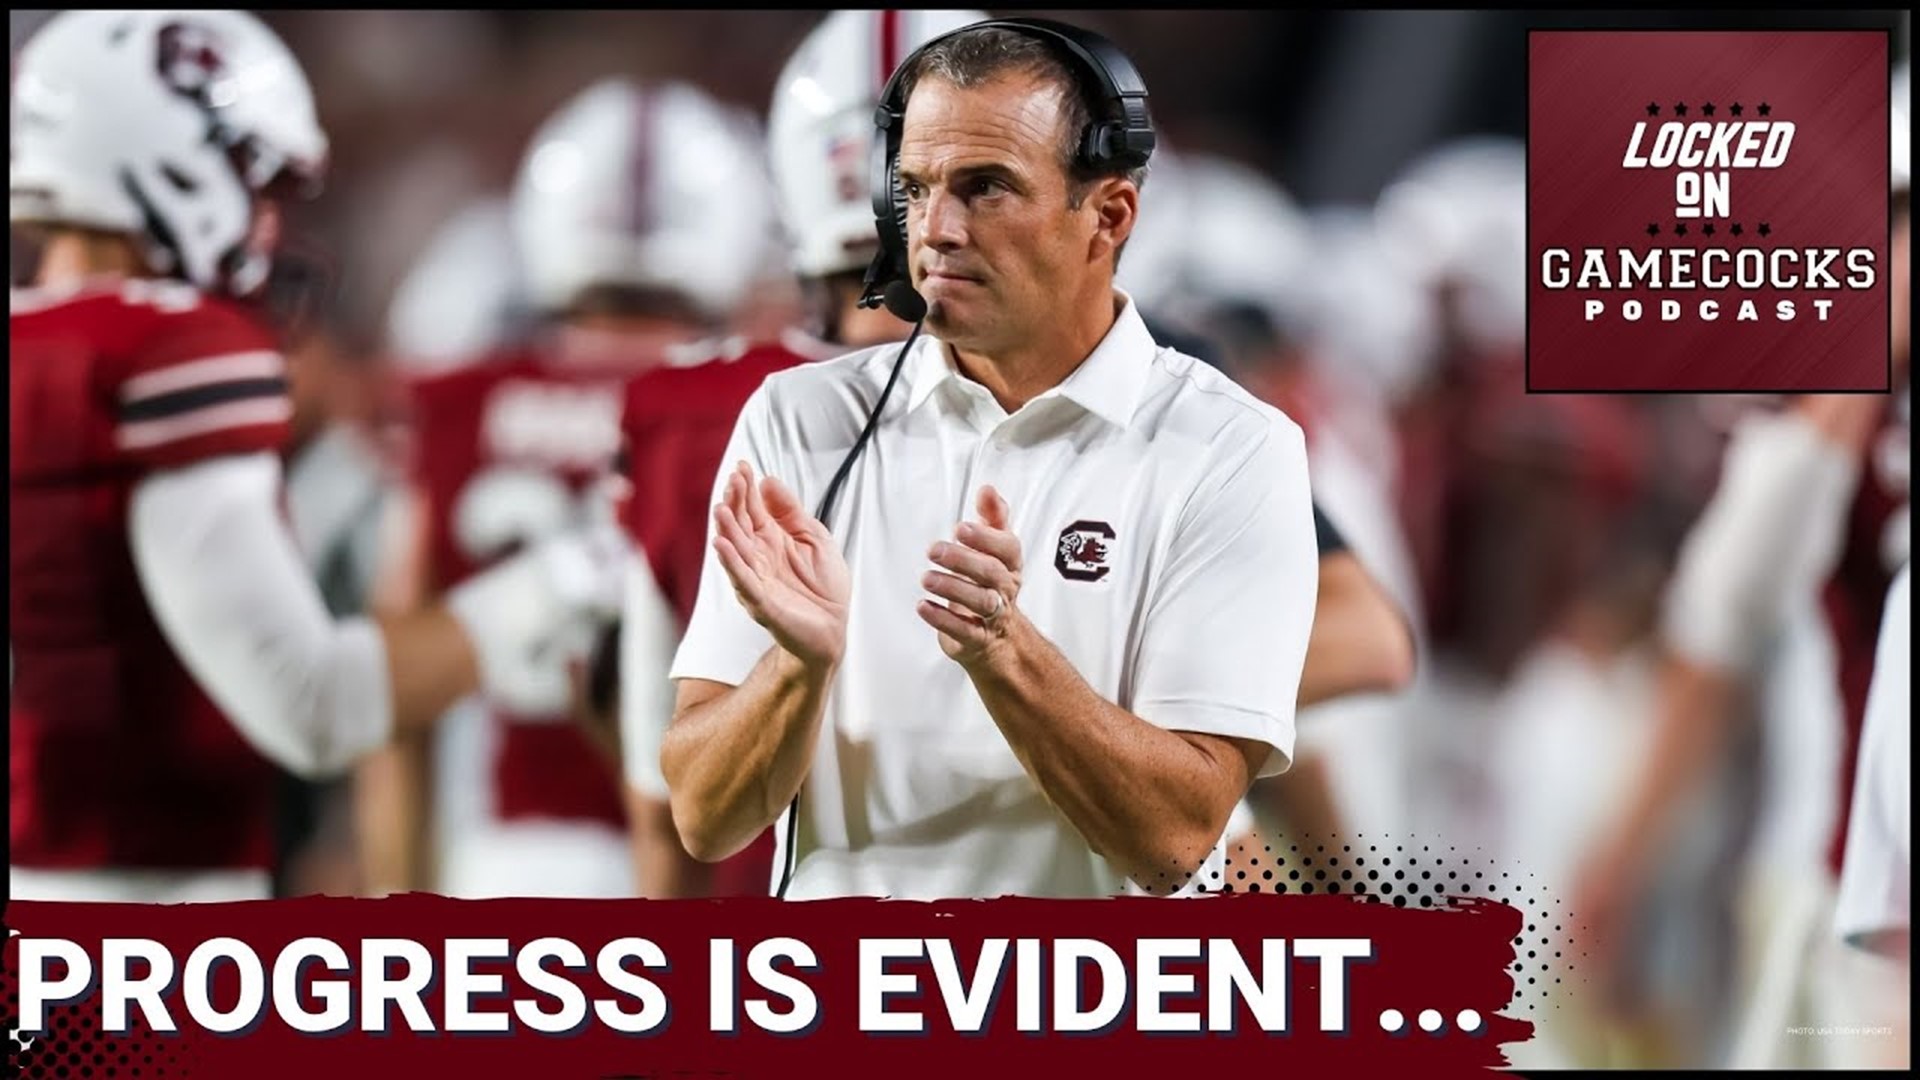 We Need To Have Perspective Regarding The Georgia Loss For South Carolina’s Football Team...